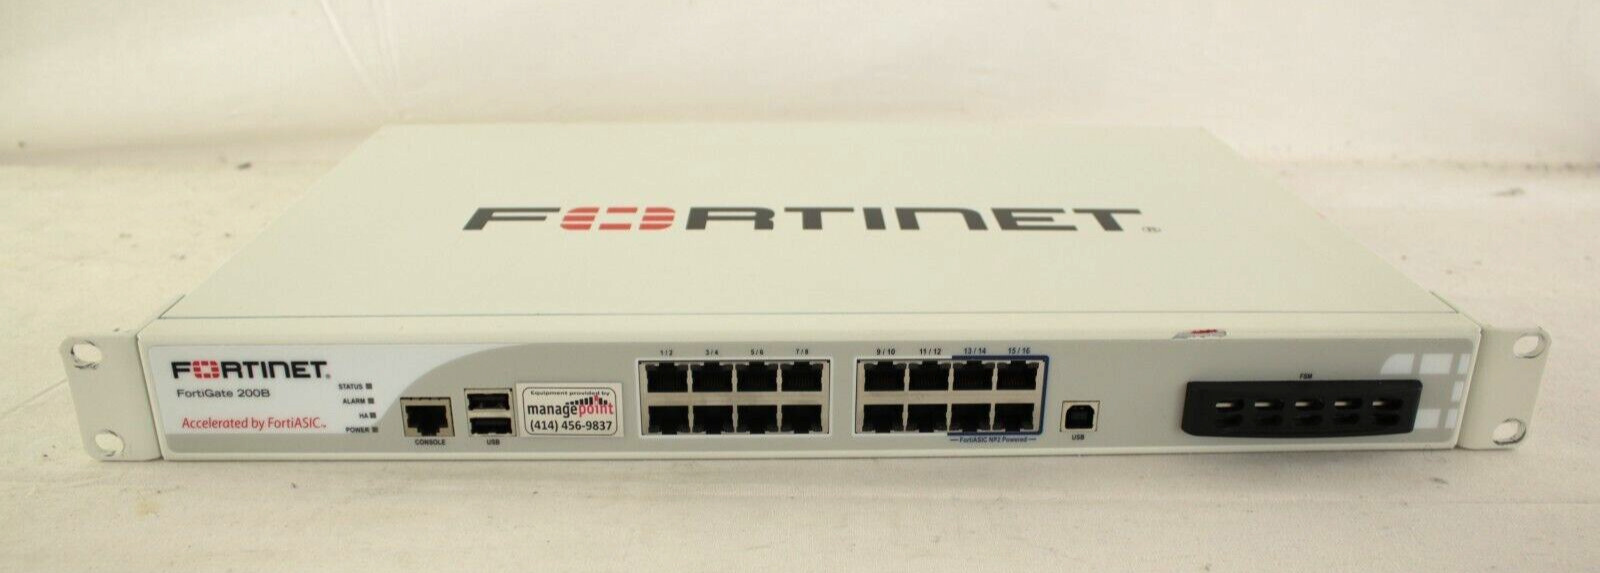 Fortinet FG-200B Fortigate 200B Firewall Network Security Device - Fast Shipping